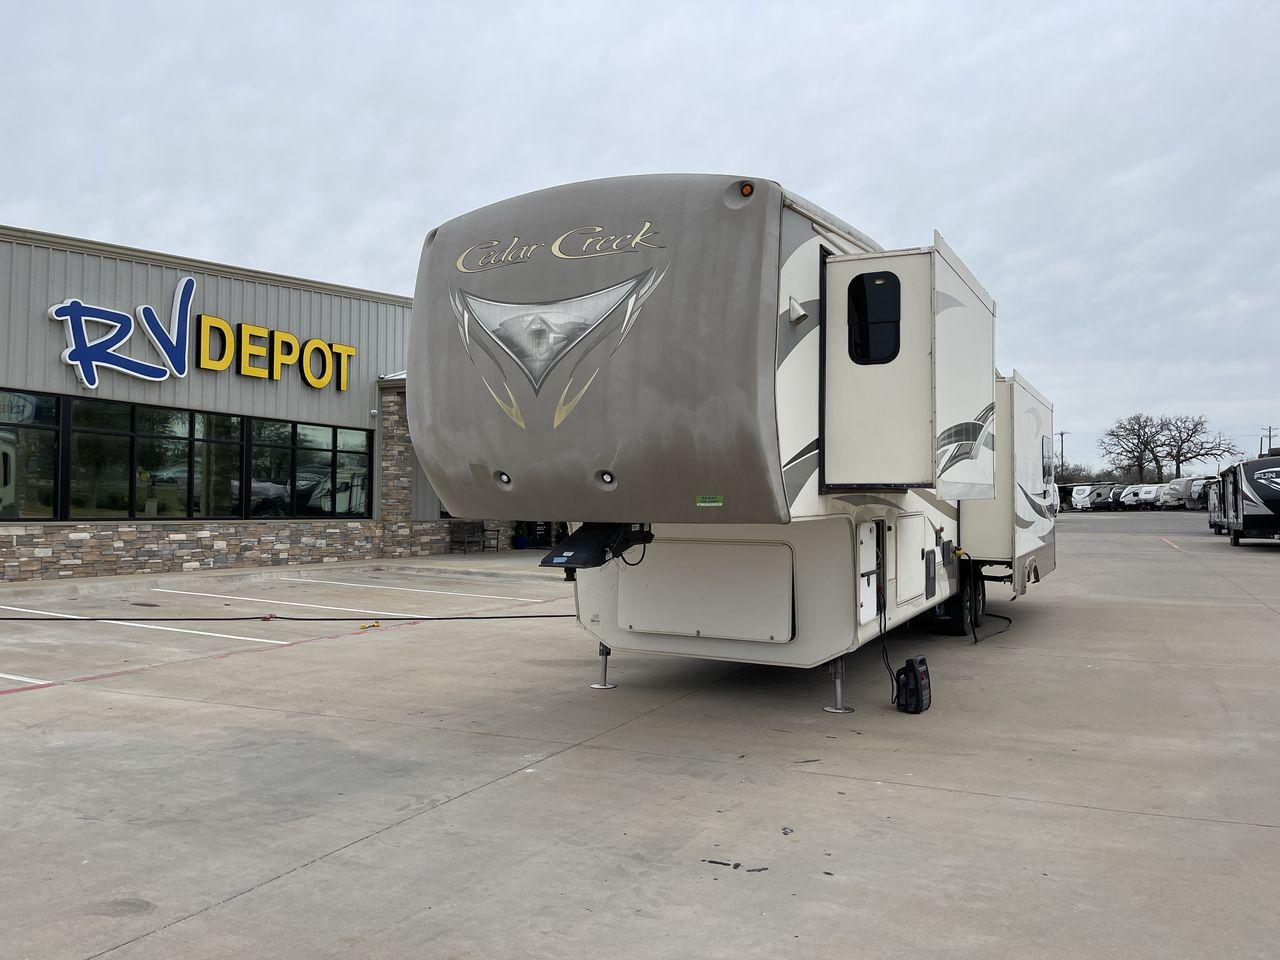 2014 TAN FOREST RIVER CEDAR CREEK 36CKTS (4X4FCRM26ES) , Length: 39.92 ft. | Dry Weight: 12,076 lbs. | Gross Weight: 16,389 lbs. | Slides: 3 transmission, located at 4319 N Main St, Cleburne, TX, 76033, (817) 678-5133, 32.385960, -97.391212 - This 2014 Forest River Cedar Creek 36CKTS Fifth Wheel measures just shy of 40 feet long and 8 feet wide. This model has a GVWR of 16,389 and a hitch weight of 2,389 lbs. This unit is equipped with heating rated at 40,000 BTUs, and cooling rated at 15,000 BTUs, meaning it will always be exactly the t - Photo #0